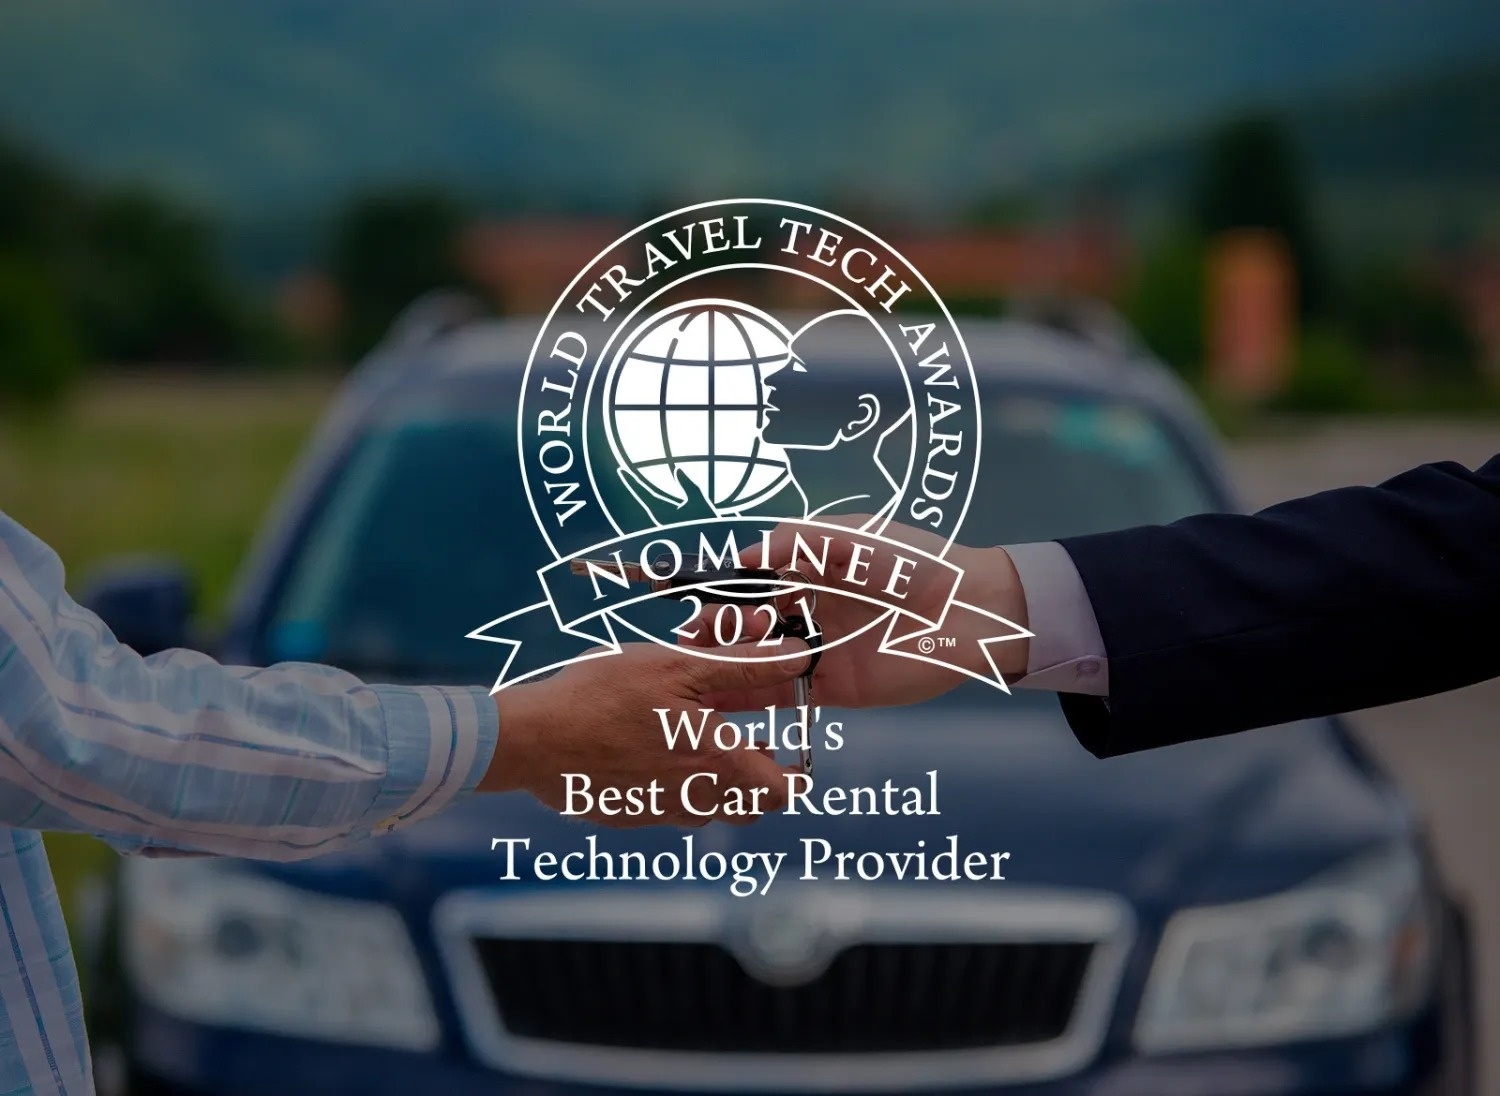 Data Seekers nominated for Best Technology Provider for Rent a Cars at the World Travel Tech Awards